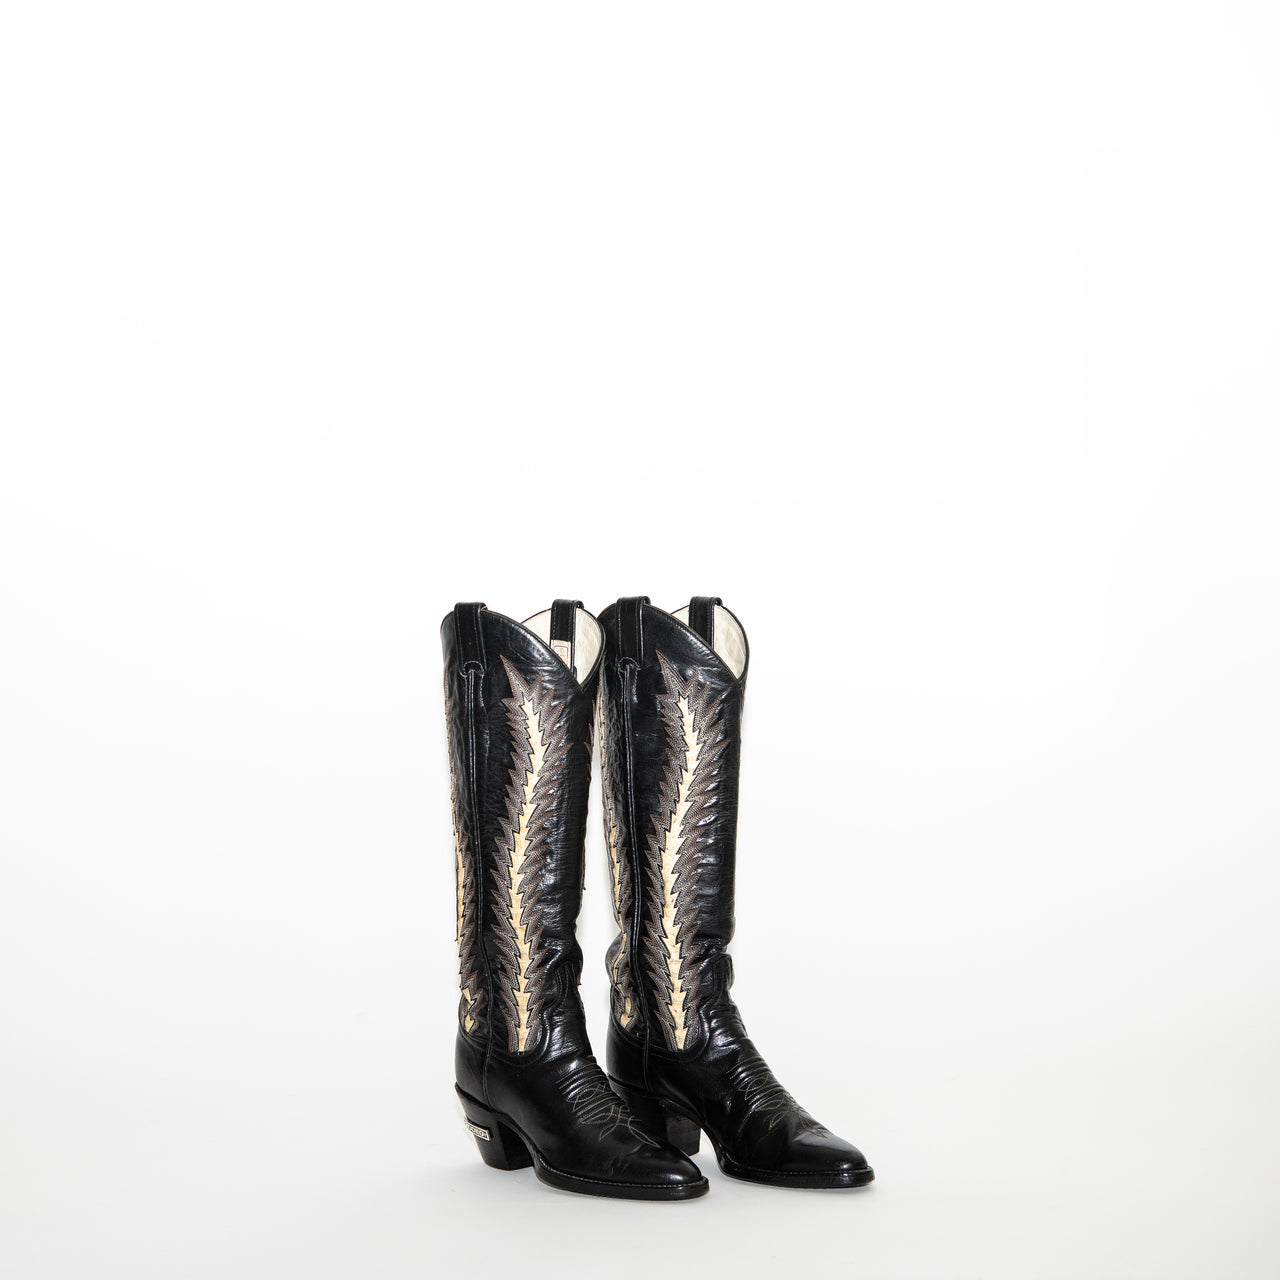 black, white, and tan star-stitched snake-skin boot